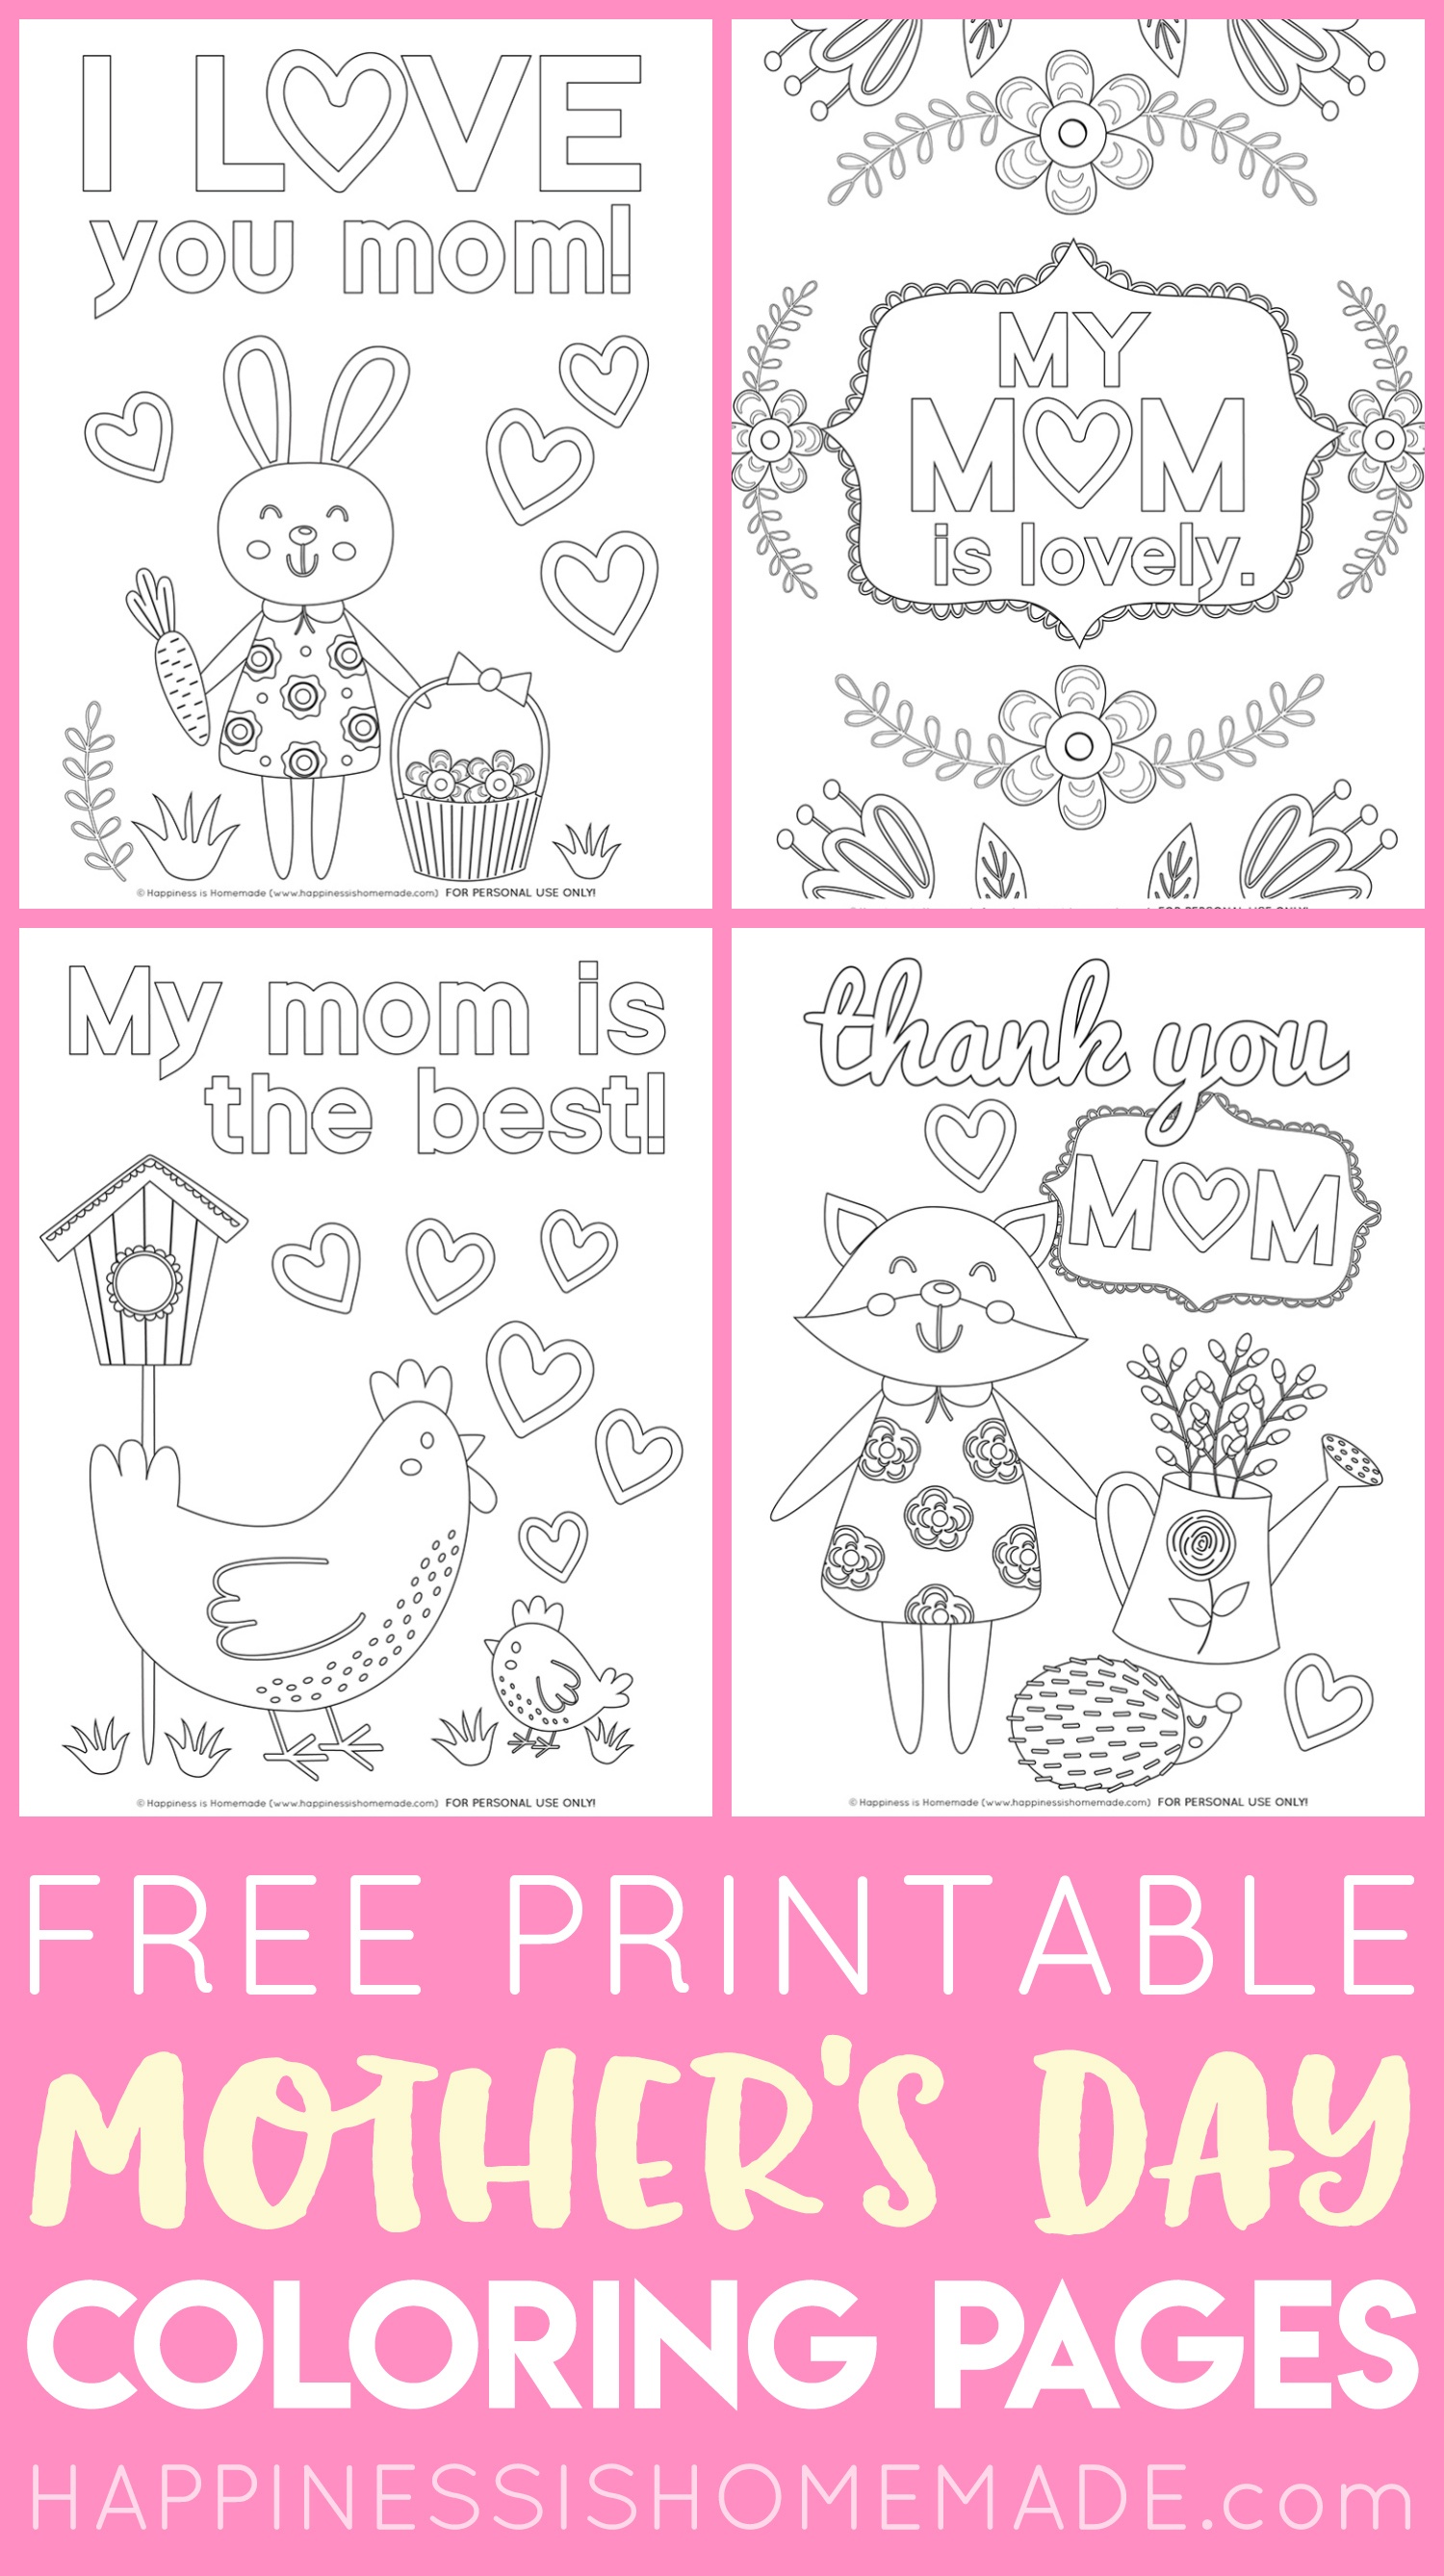 Mother&amp;#039;s Day Coloring Pages - Free Printables - Happiness Is Homemade - Free Mother&amp;amp;#039;s Day Printables